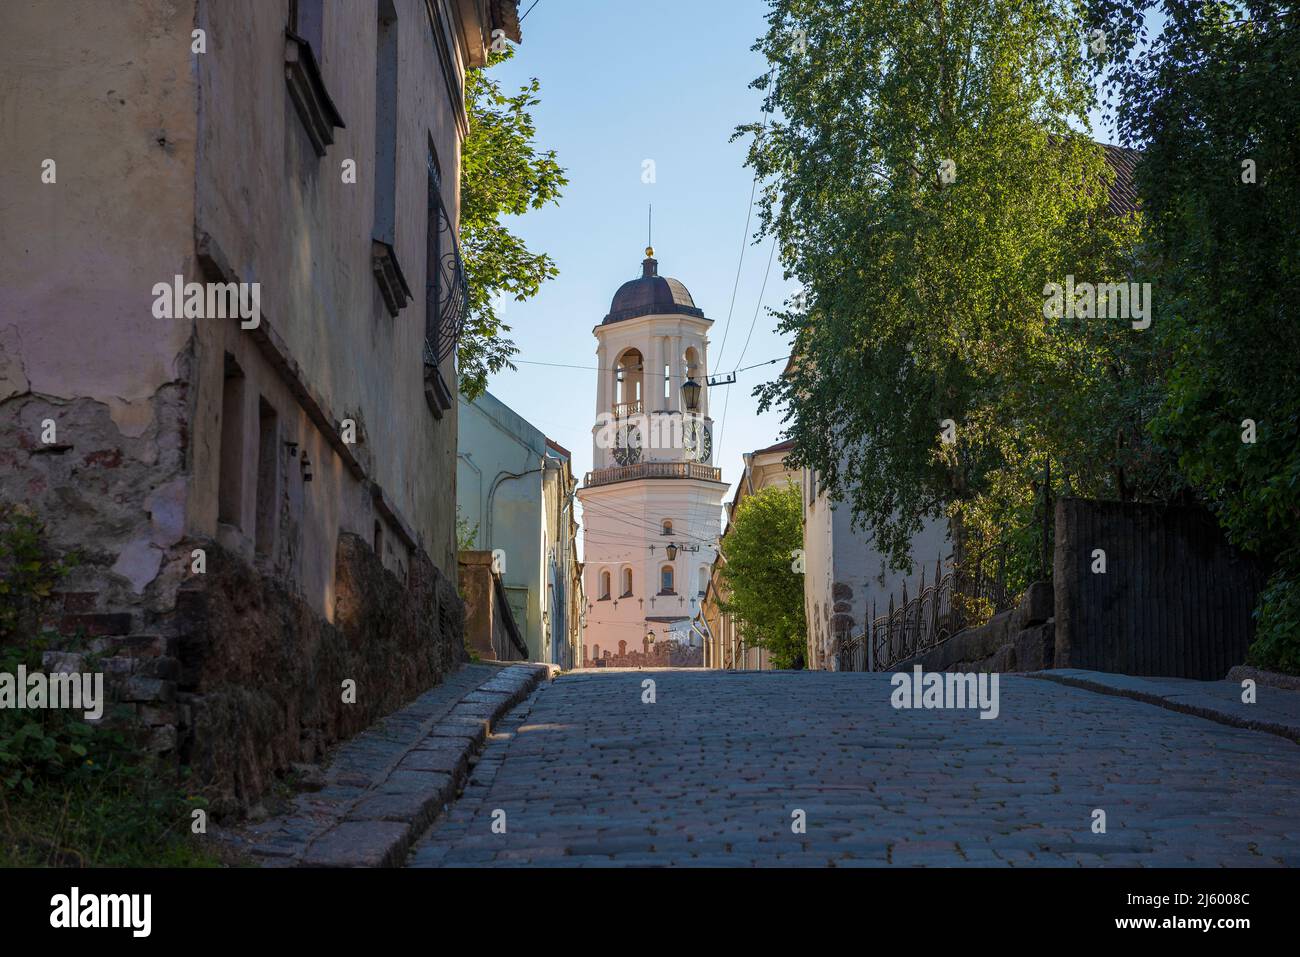 View of the ancient Clock Tower from Vodnaya Zastava street on a sunny August evening. Vyborg, Russia Stock Photo